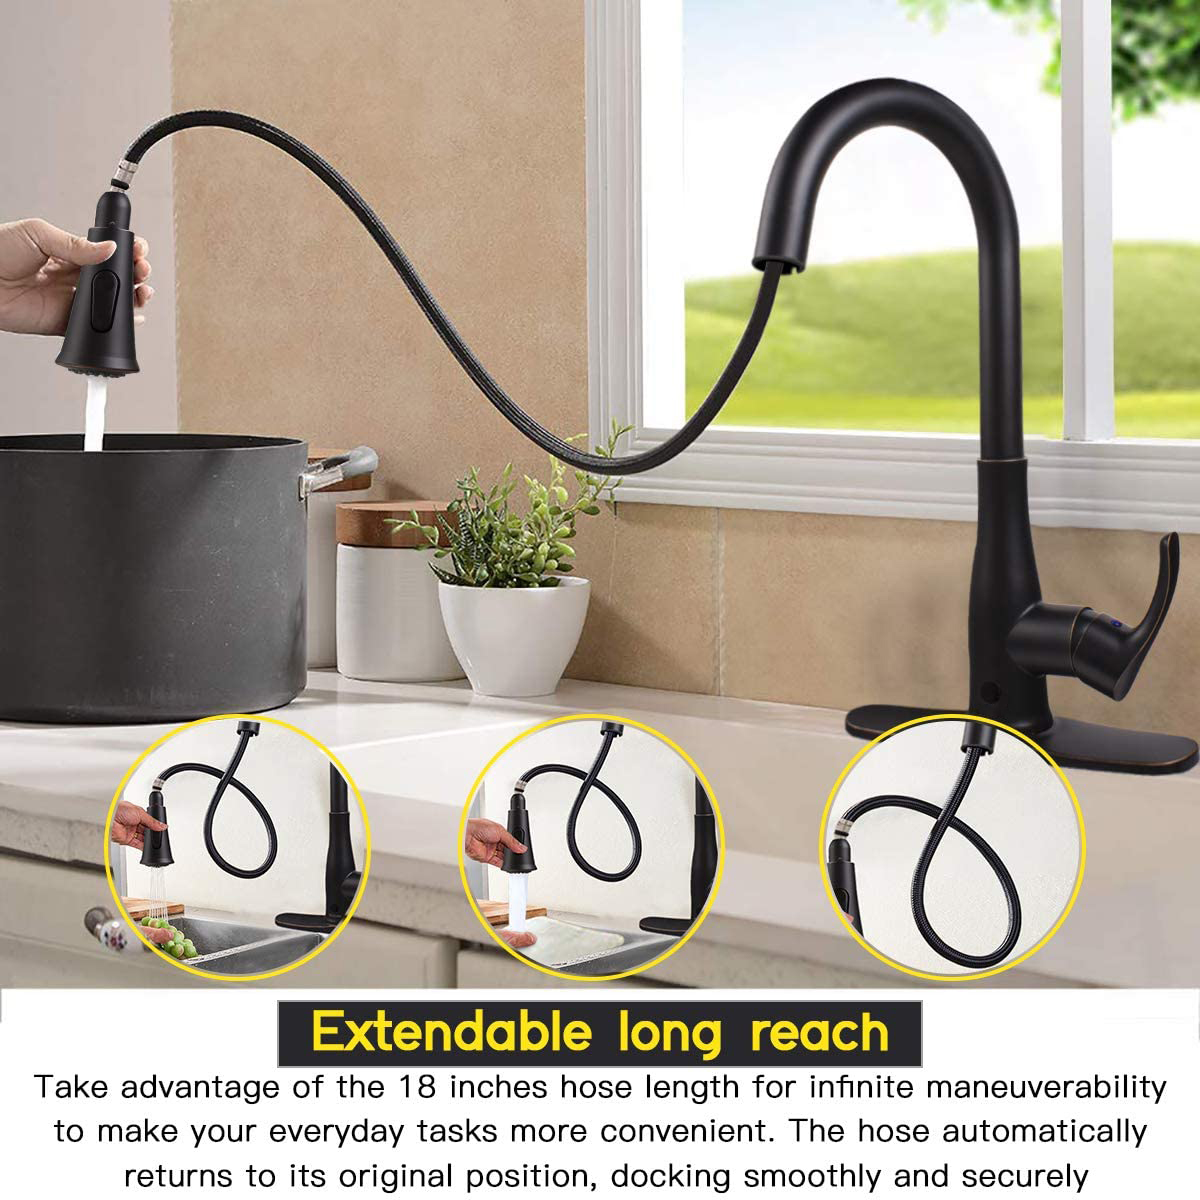 Aquacubic cUPC Touchless Kitchen Faucets Motion Sensor Automatic Kitchen Sink Faucet with 2 Function Pull Down Sprayer